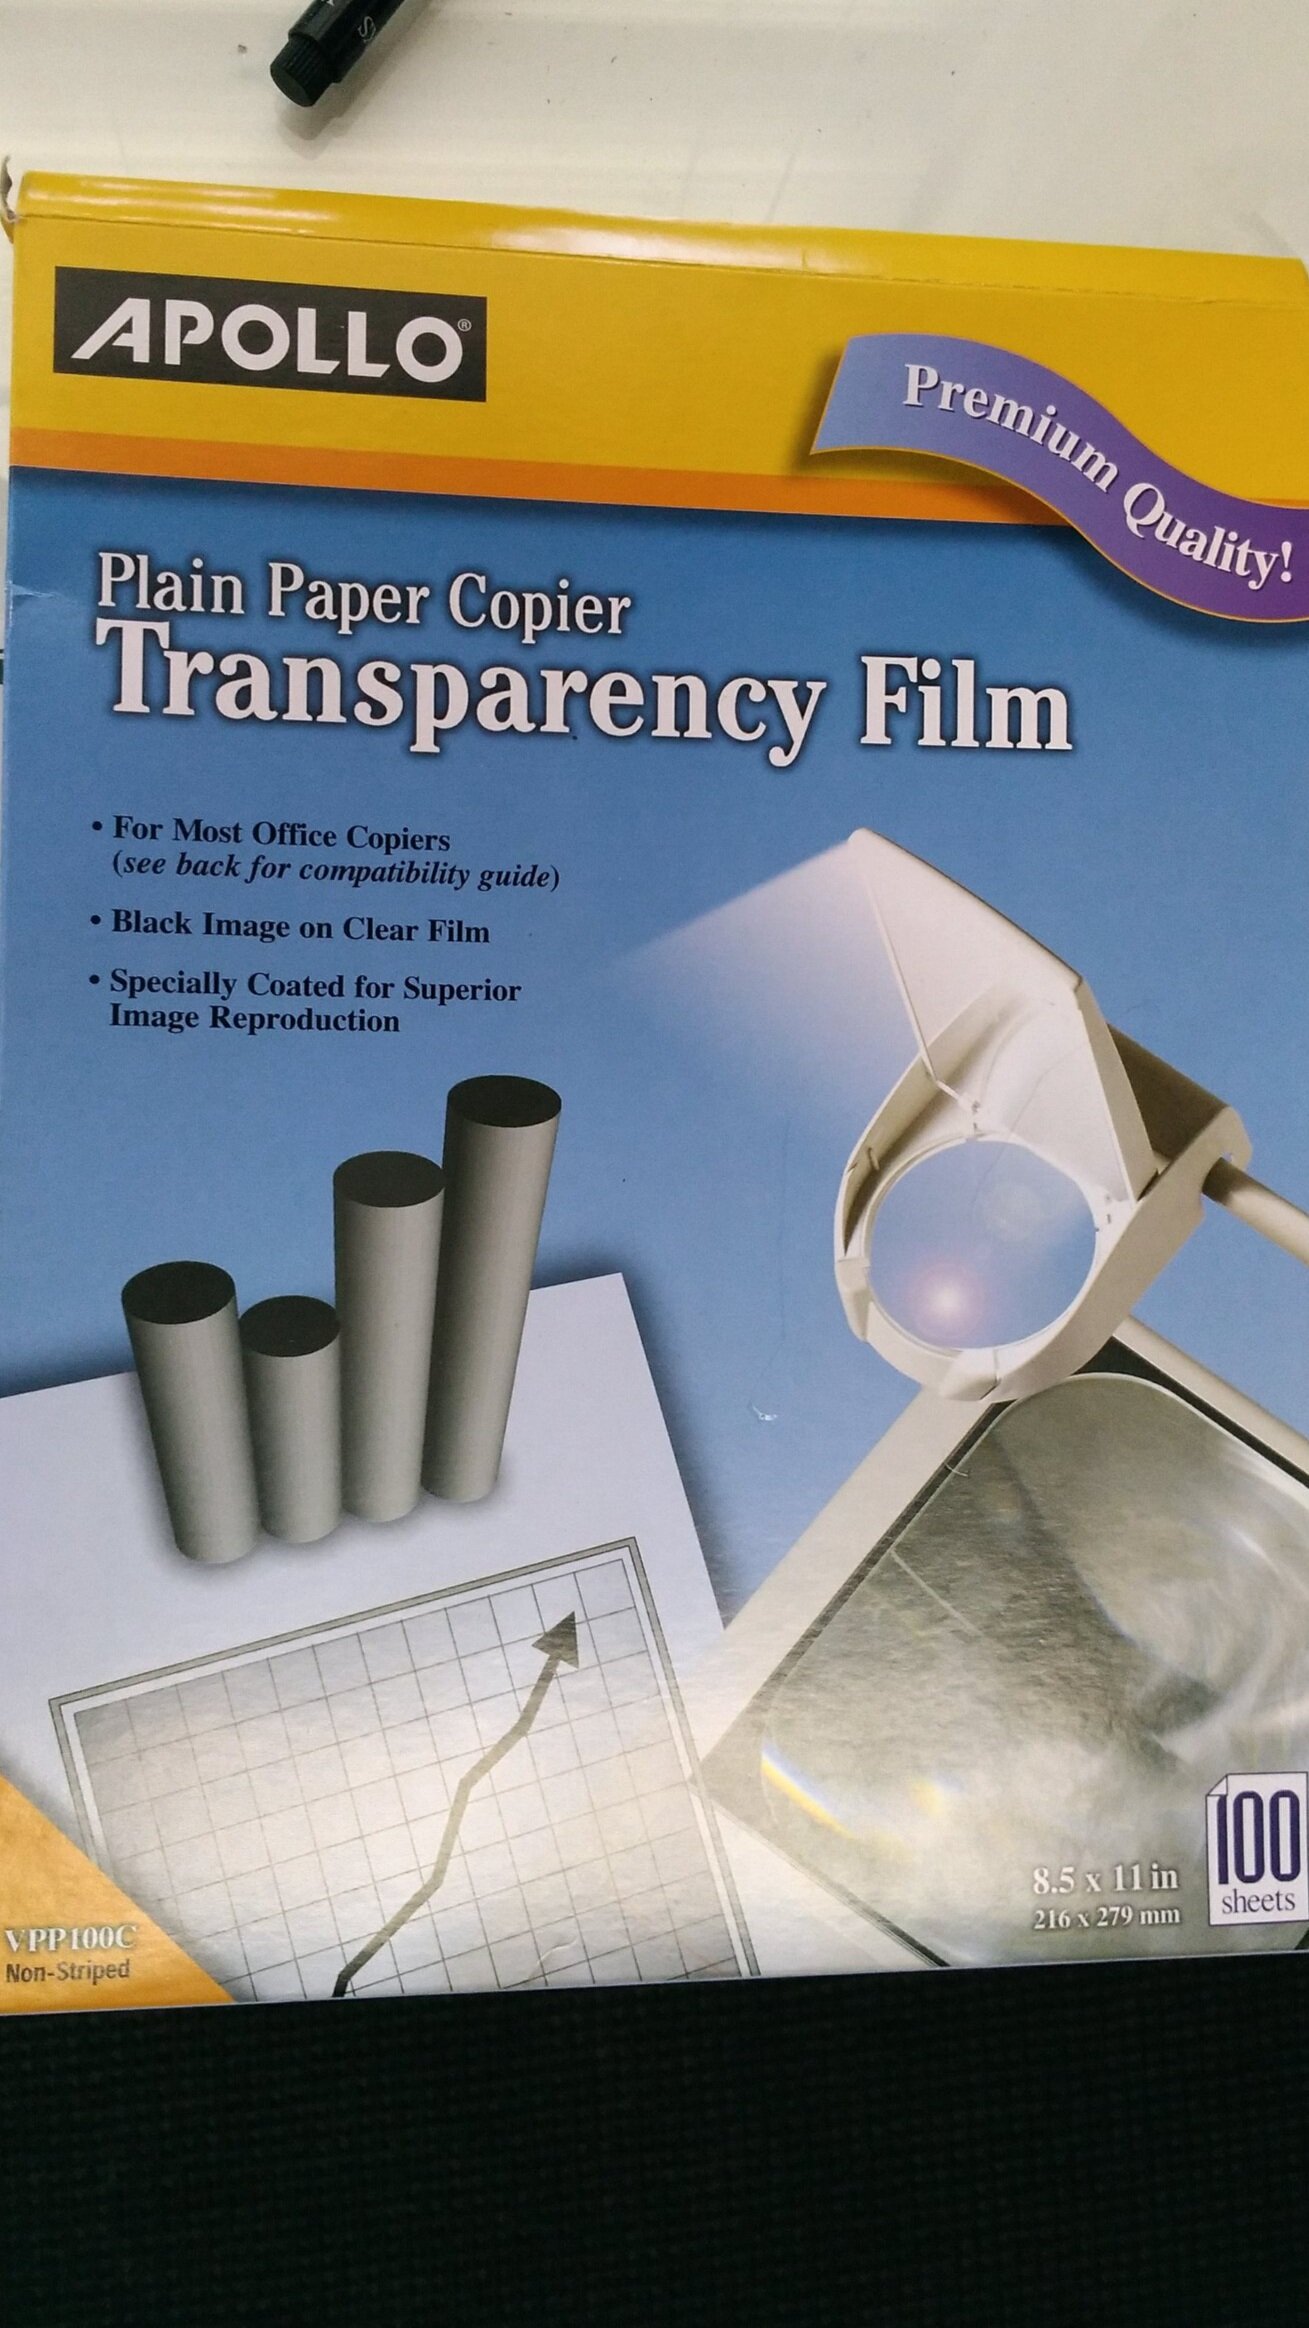  A packet of Transparency Film from Office Depot is next. 